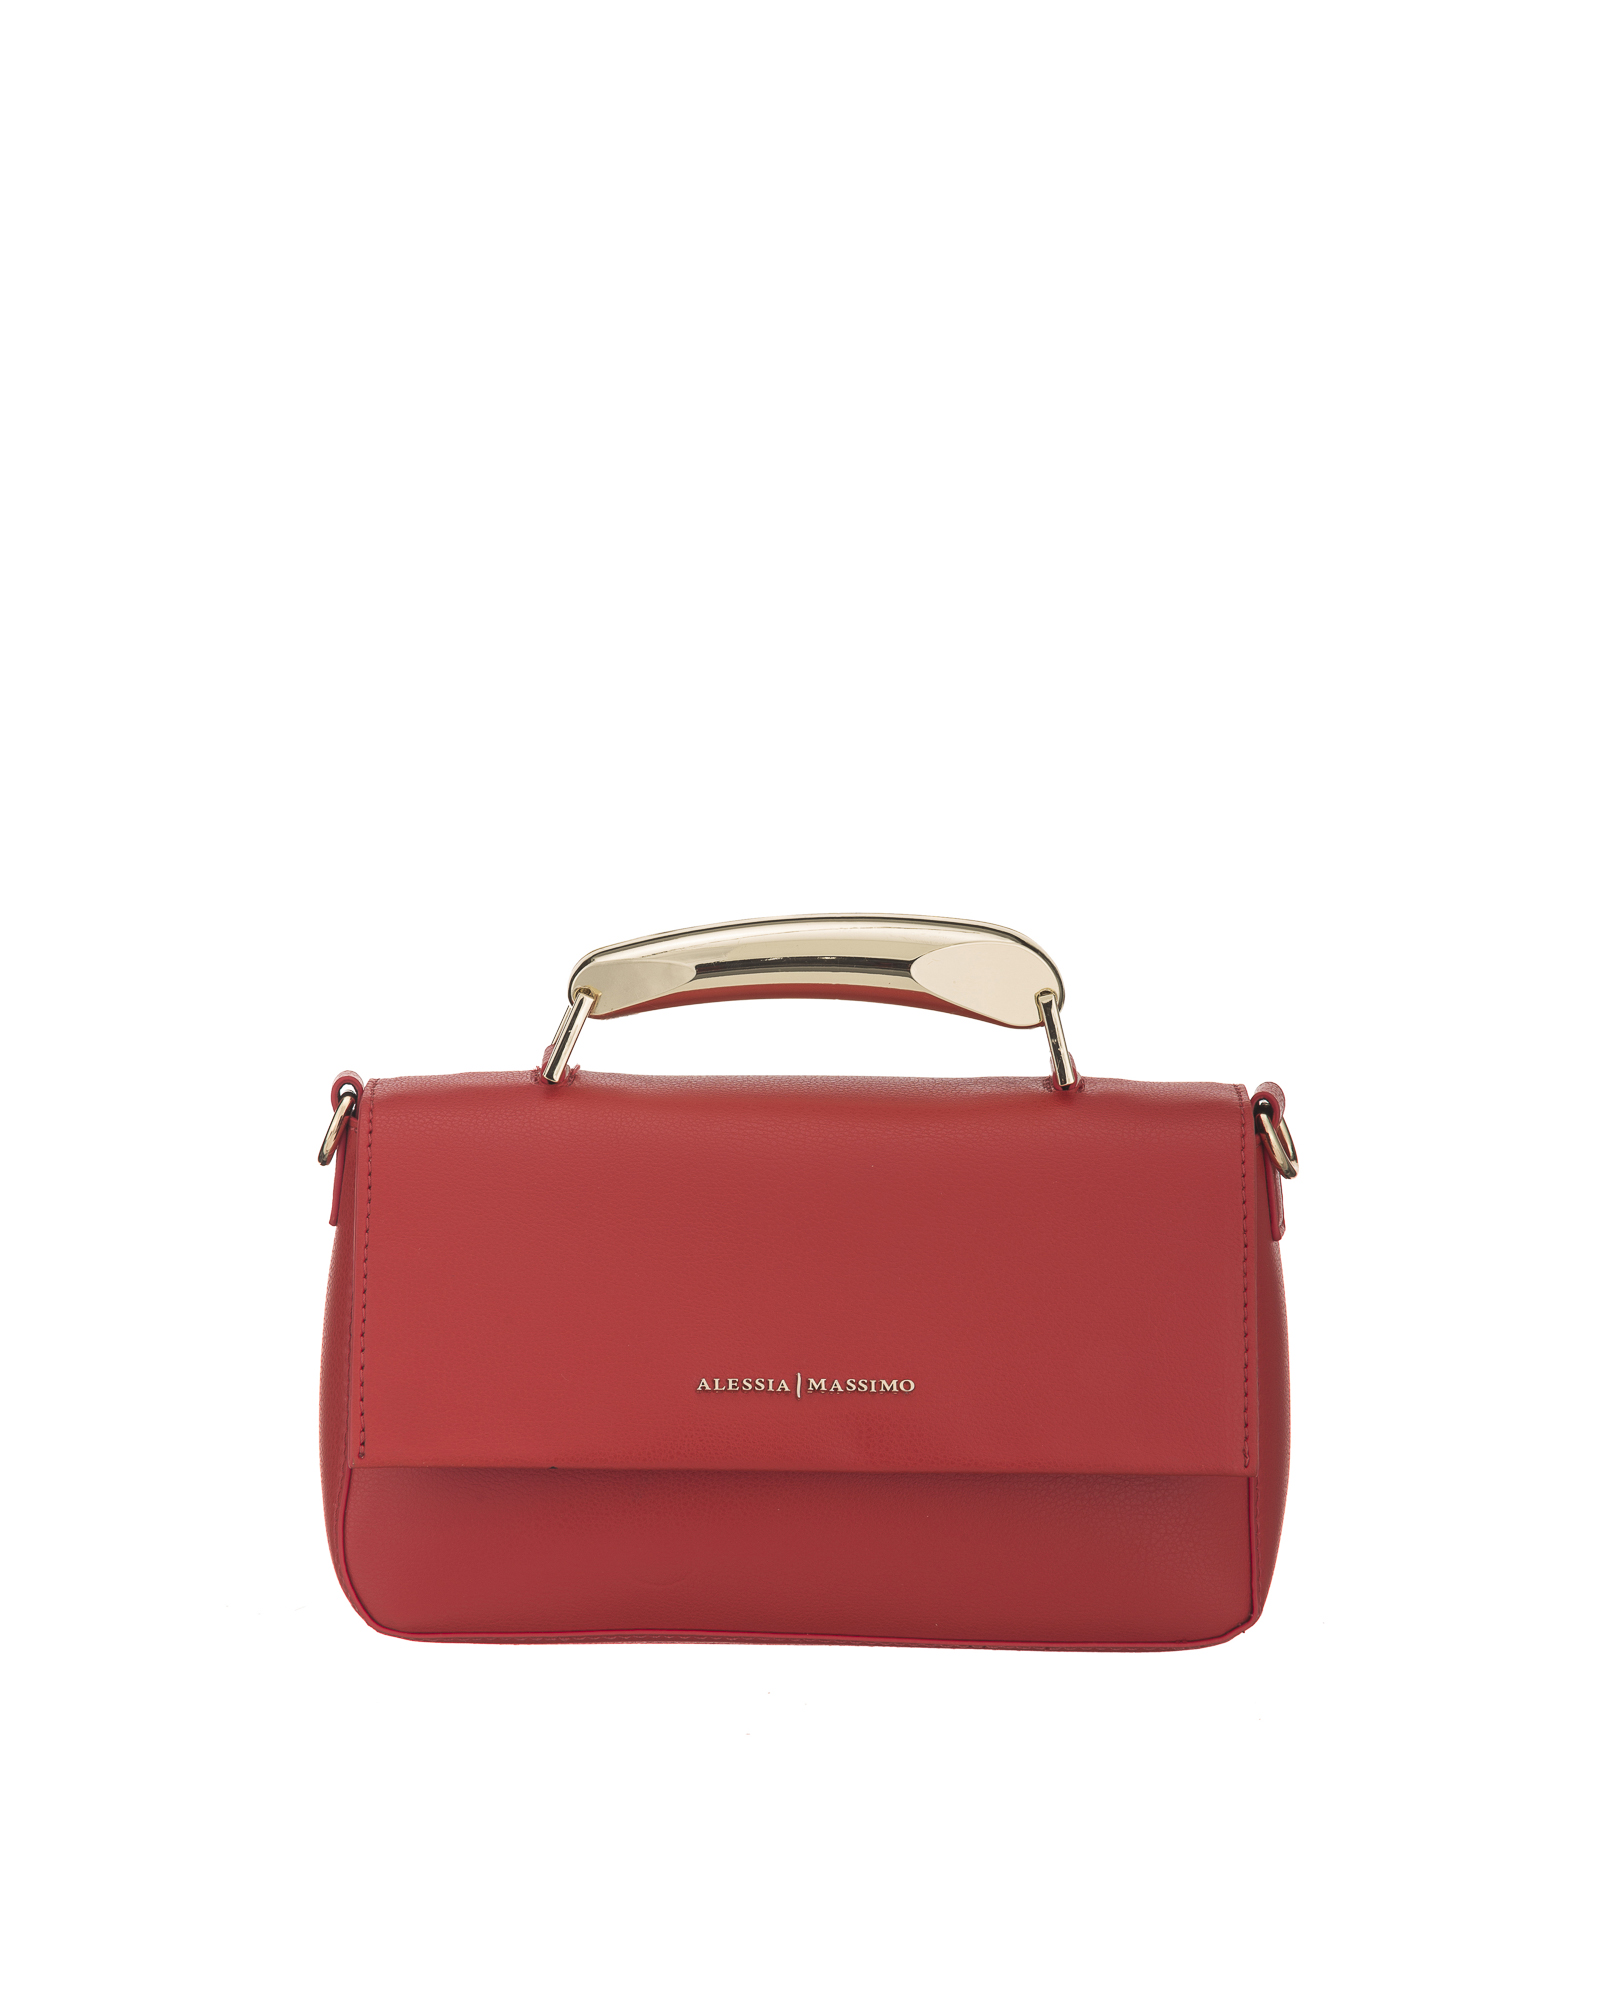 BAG RED - STYLE1307